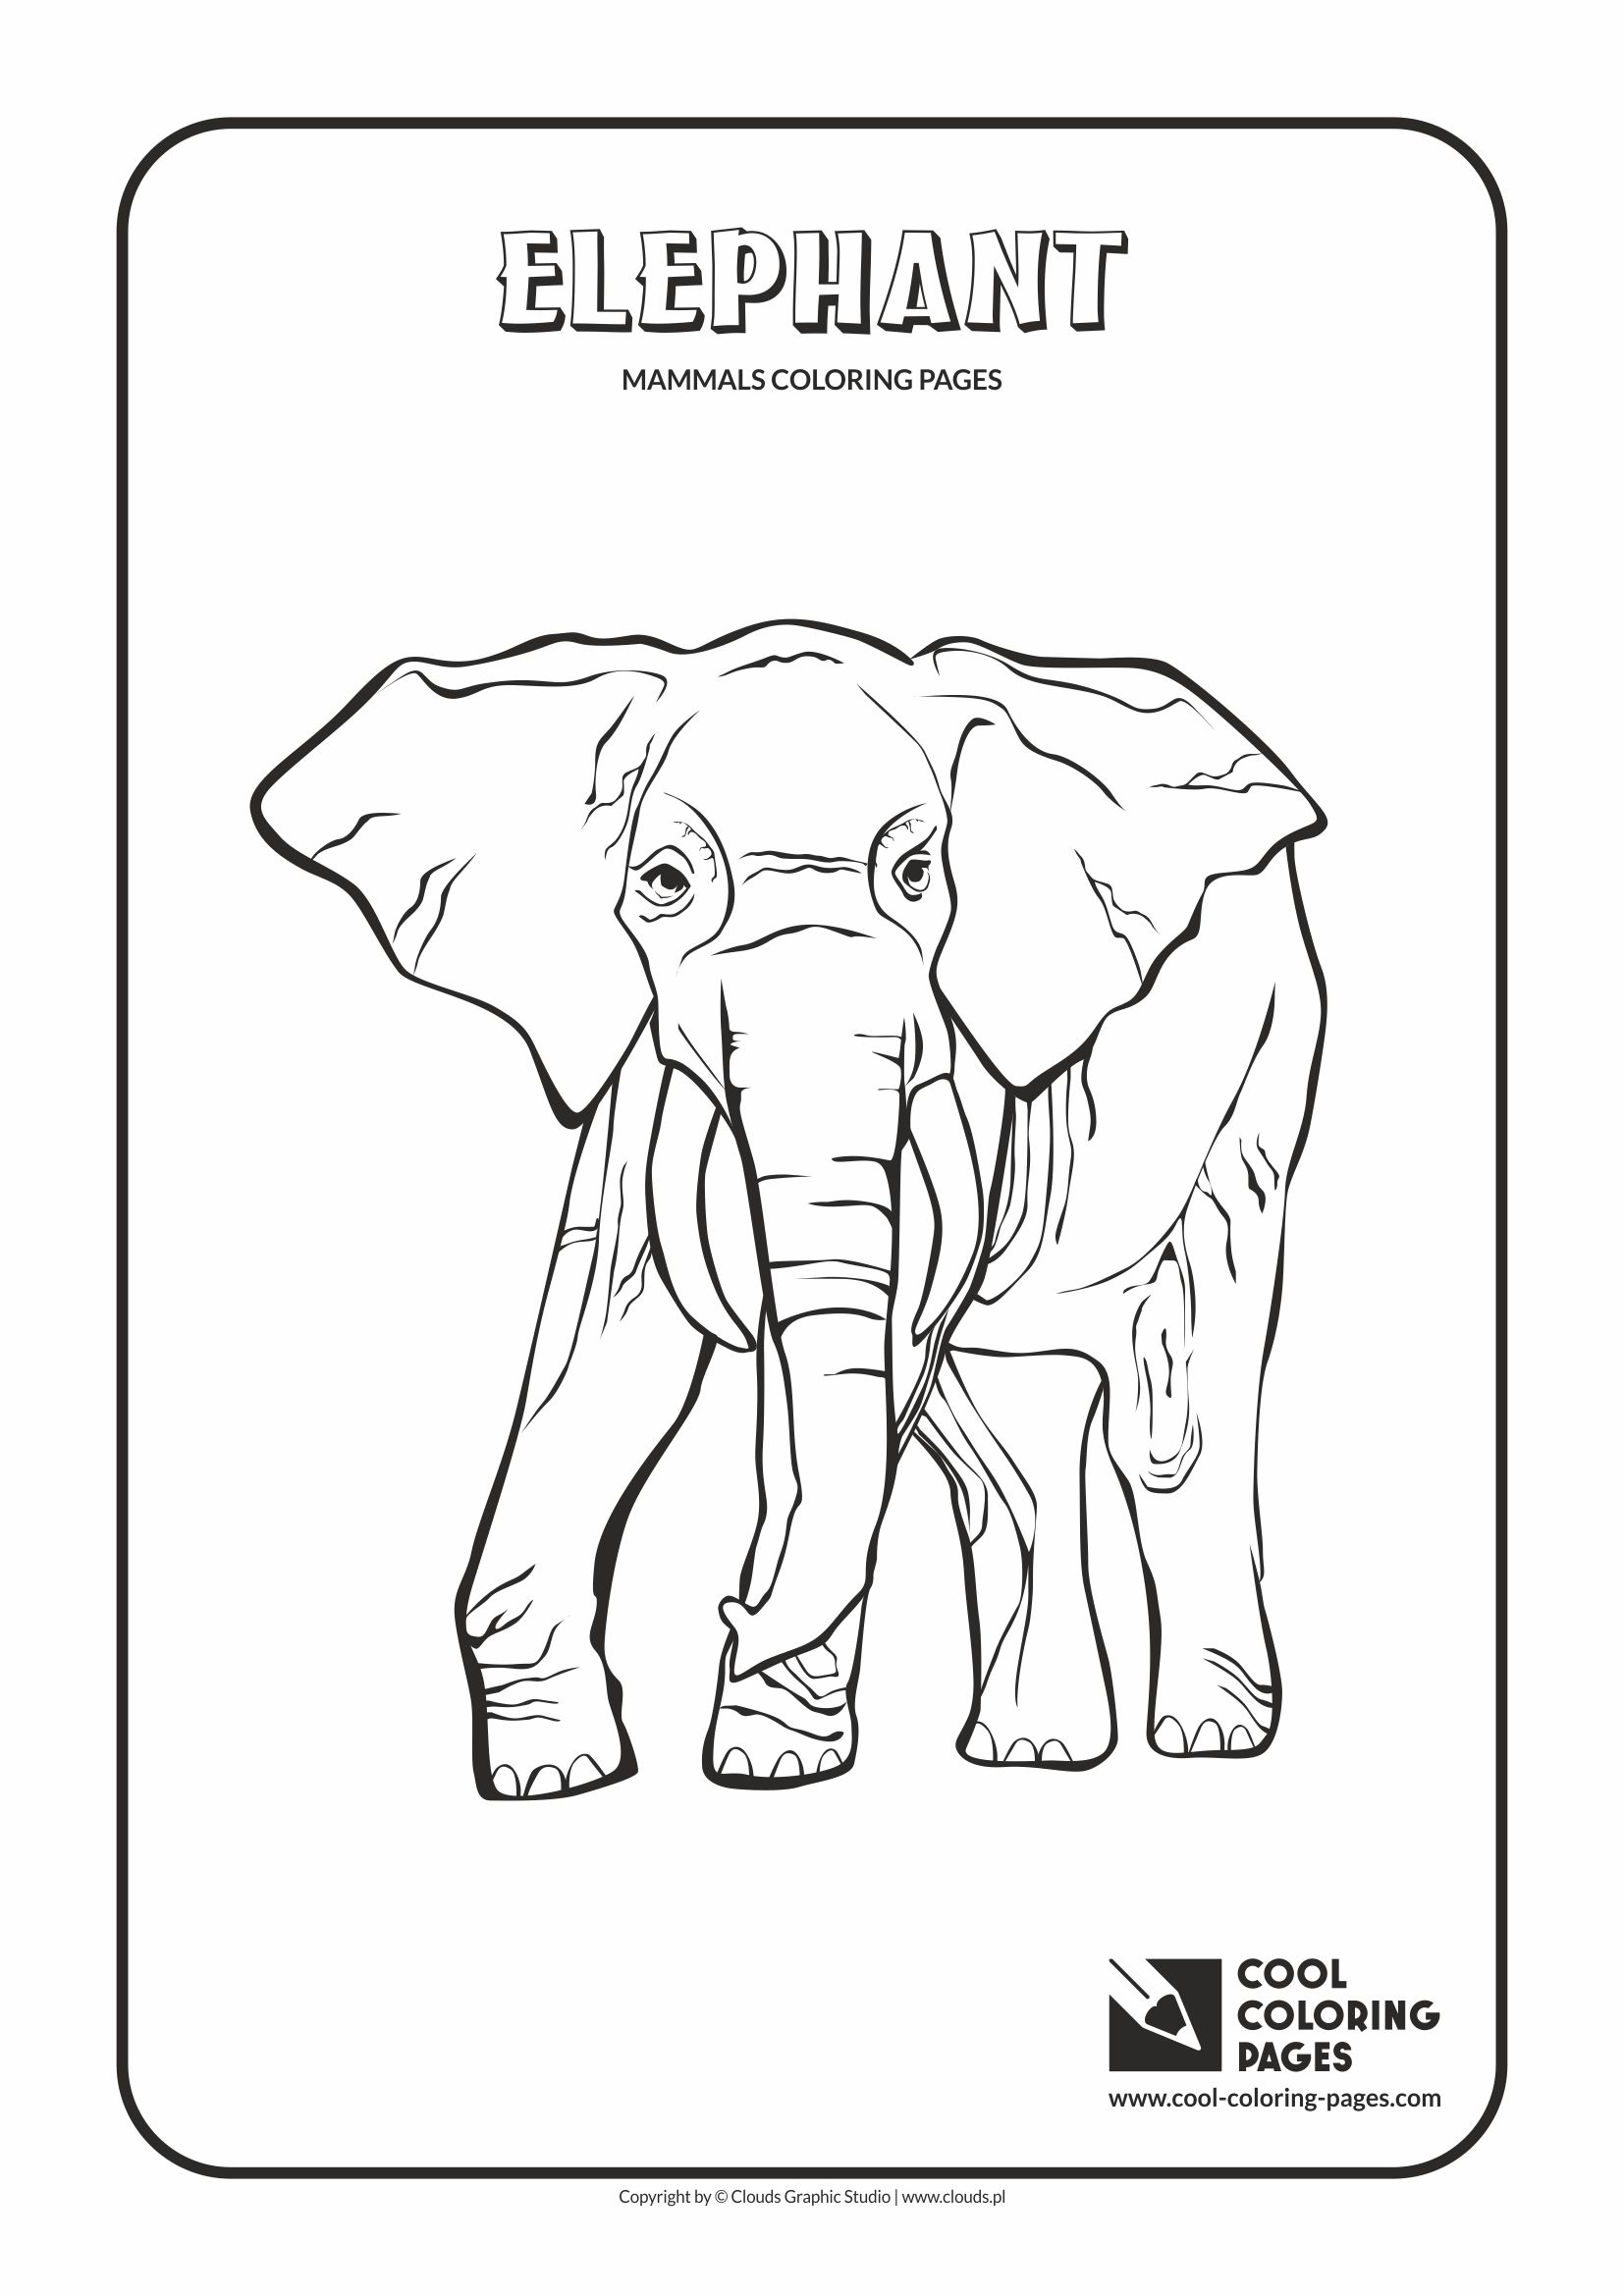 Download Cool Coloring Pages Mammals coloring pages - Cool Coloring Pages | Free educational coloring ...